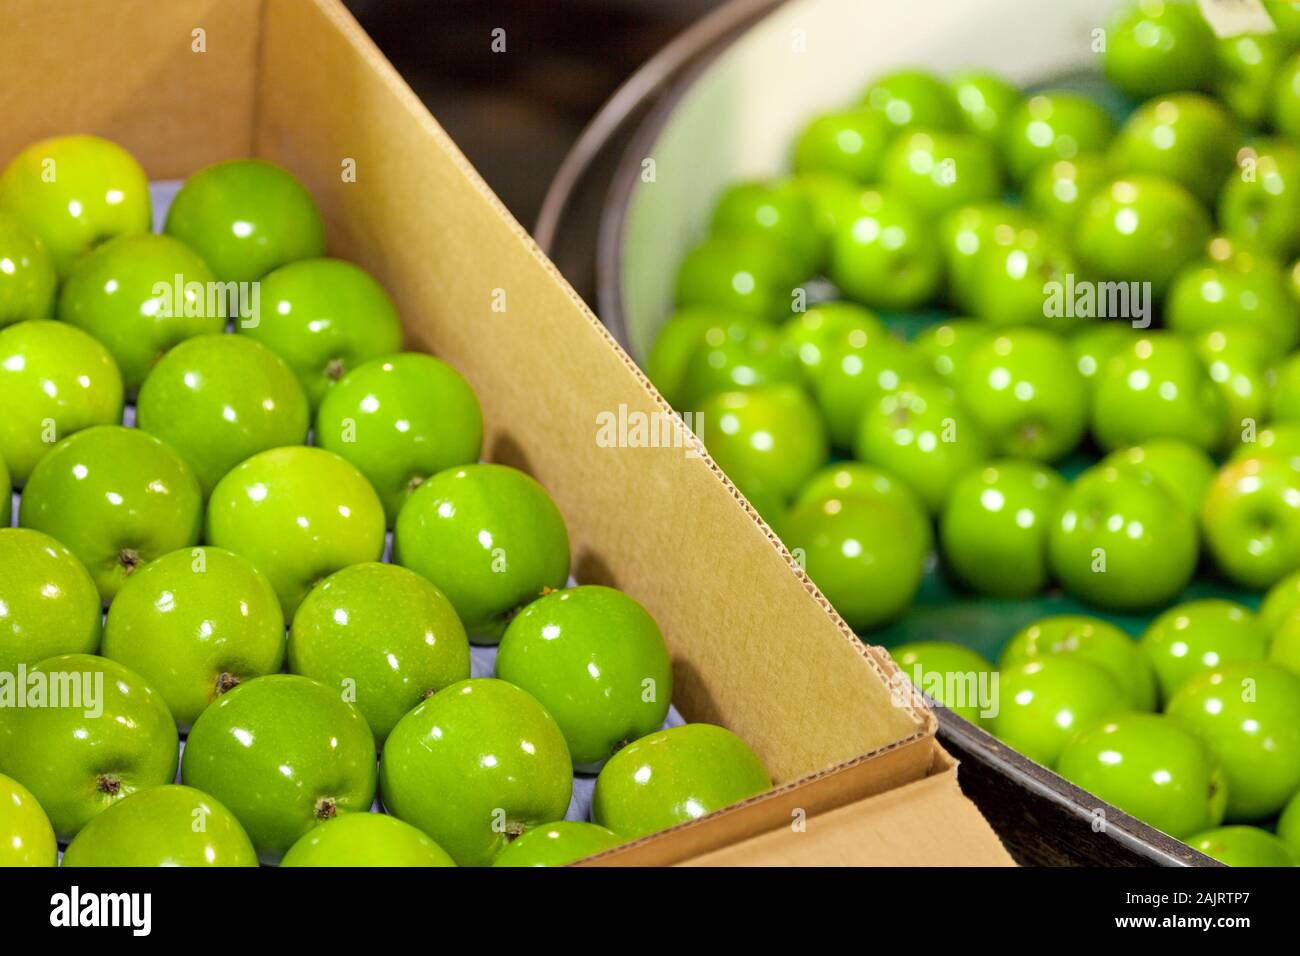 Fresh, green Granny Smith apples in a fruit packaging warehouse Stock Photo